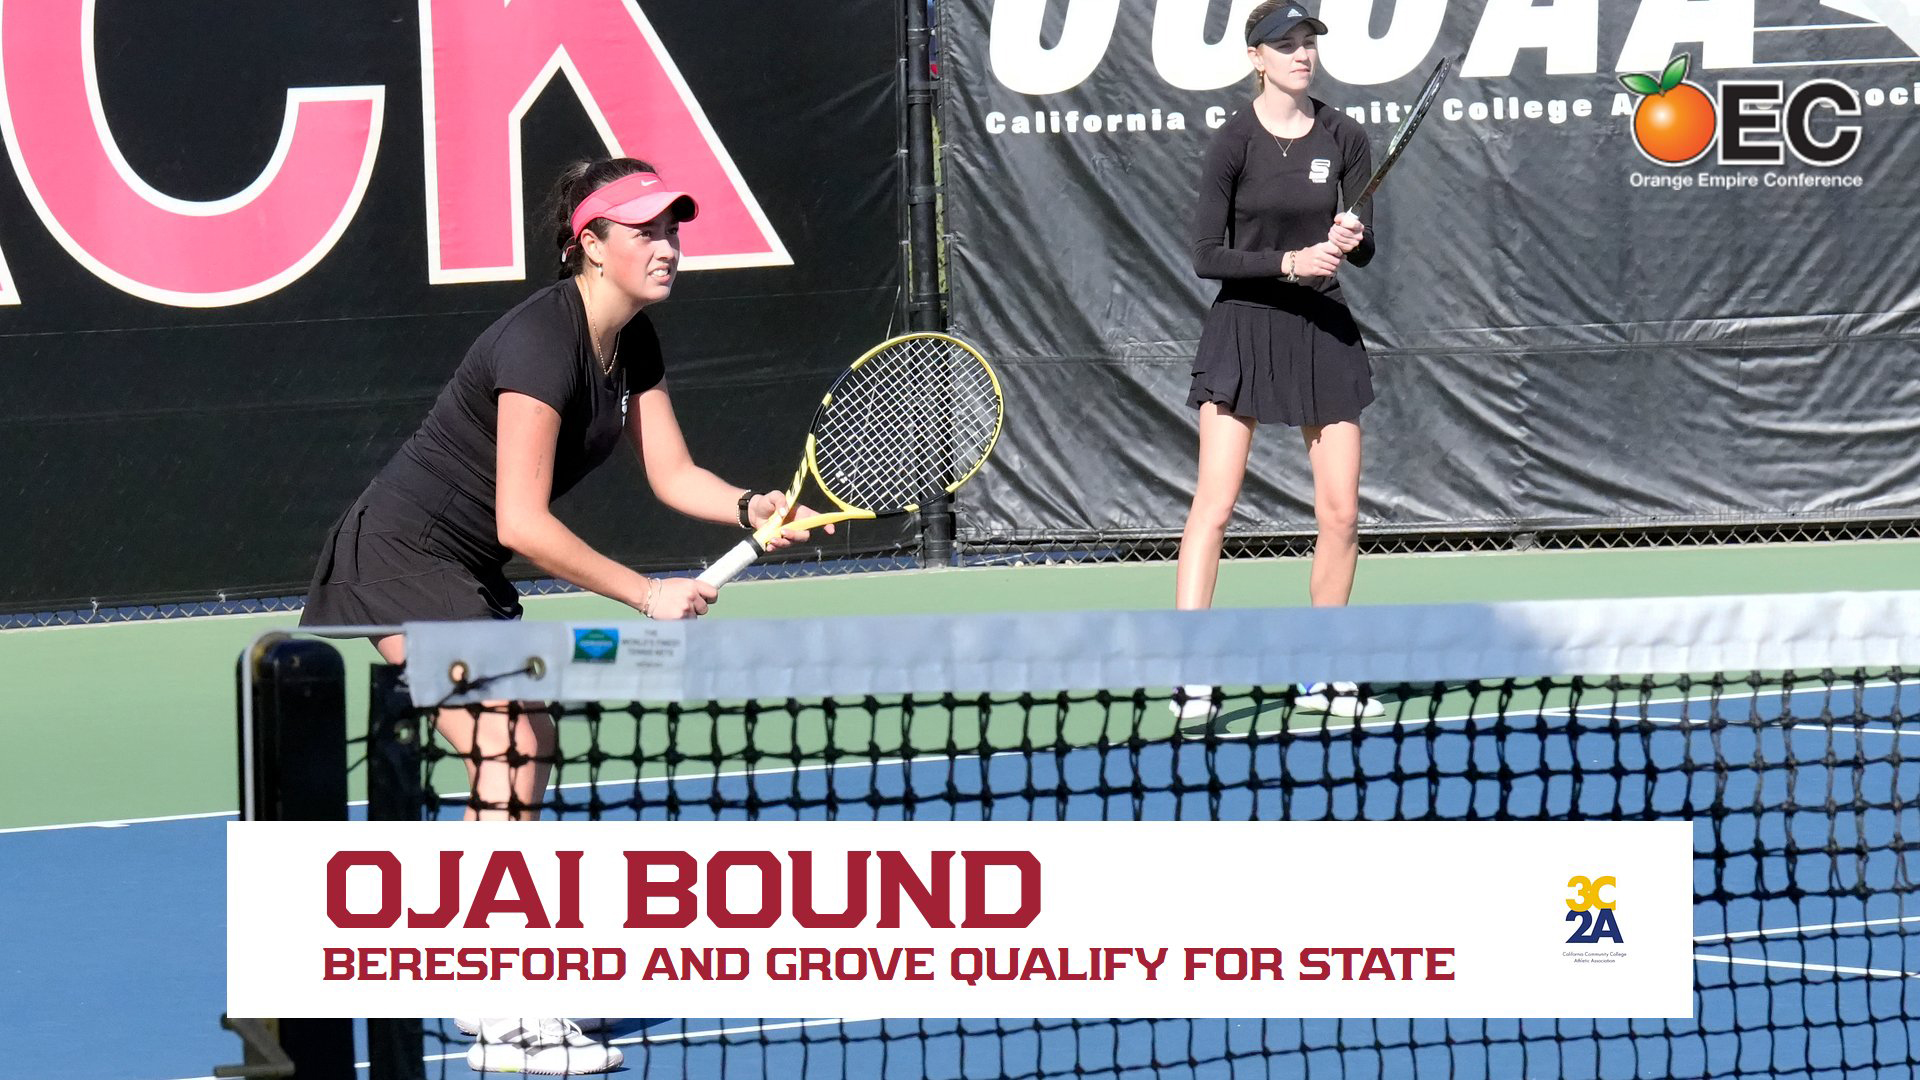 Two women&rsquo;s doubles teams qualify for state